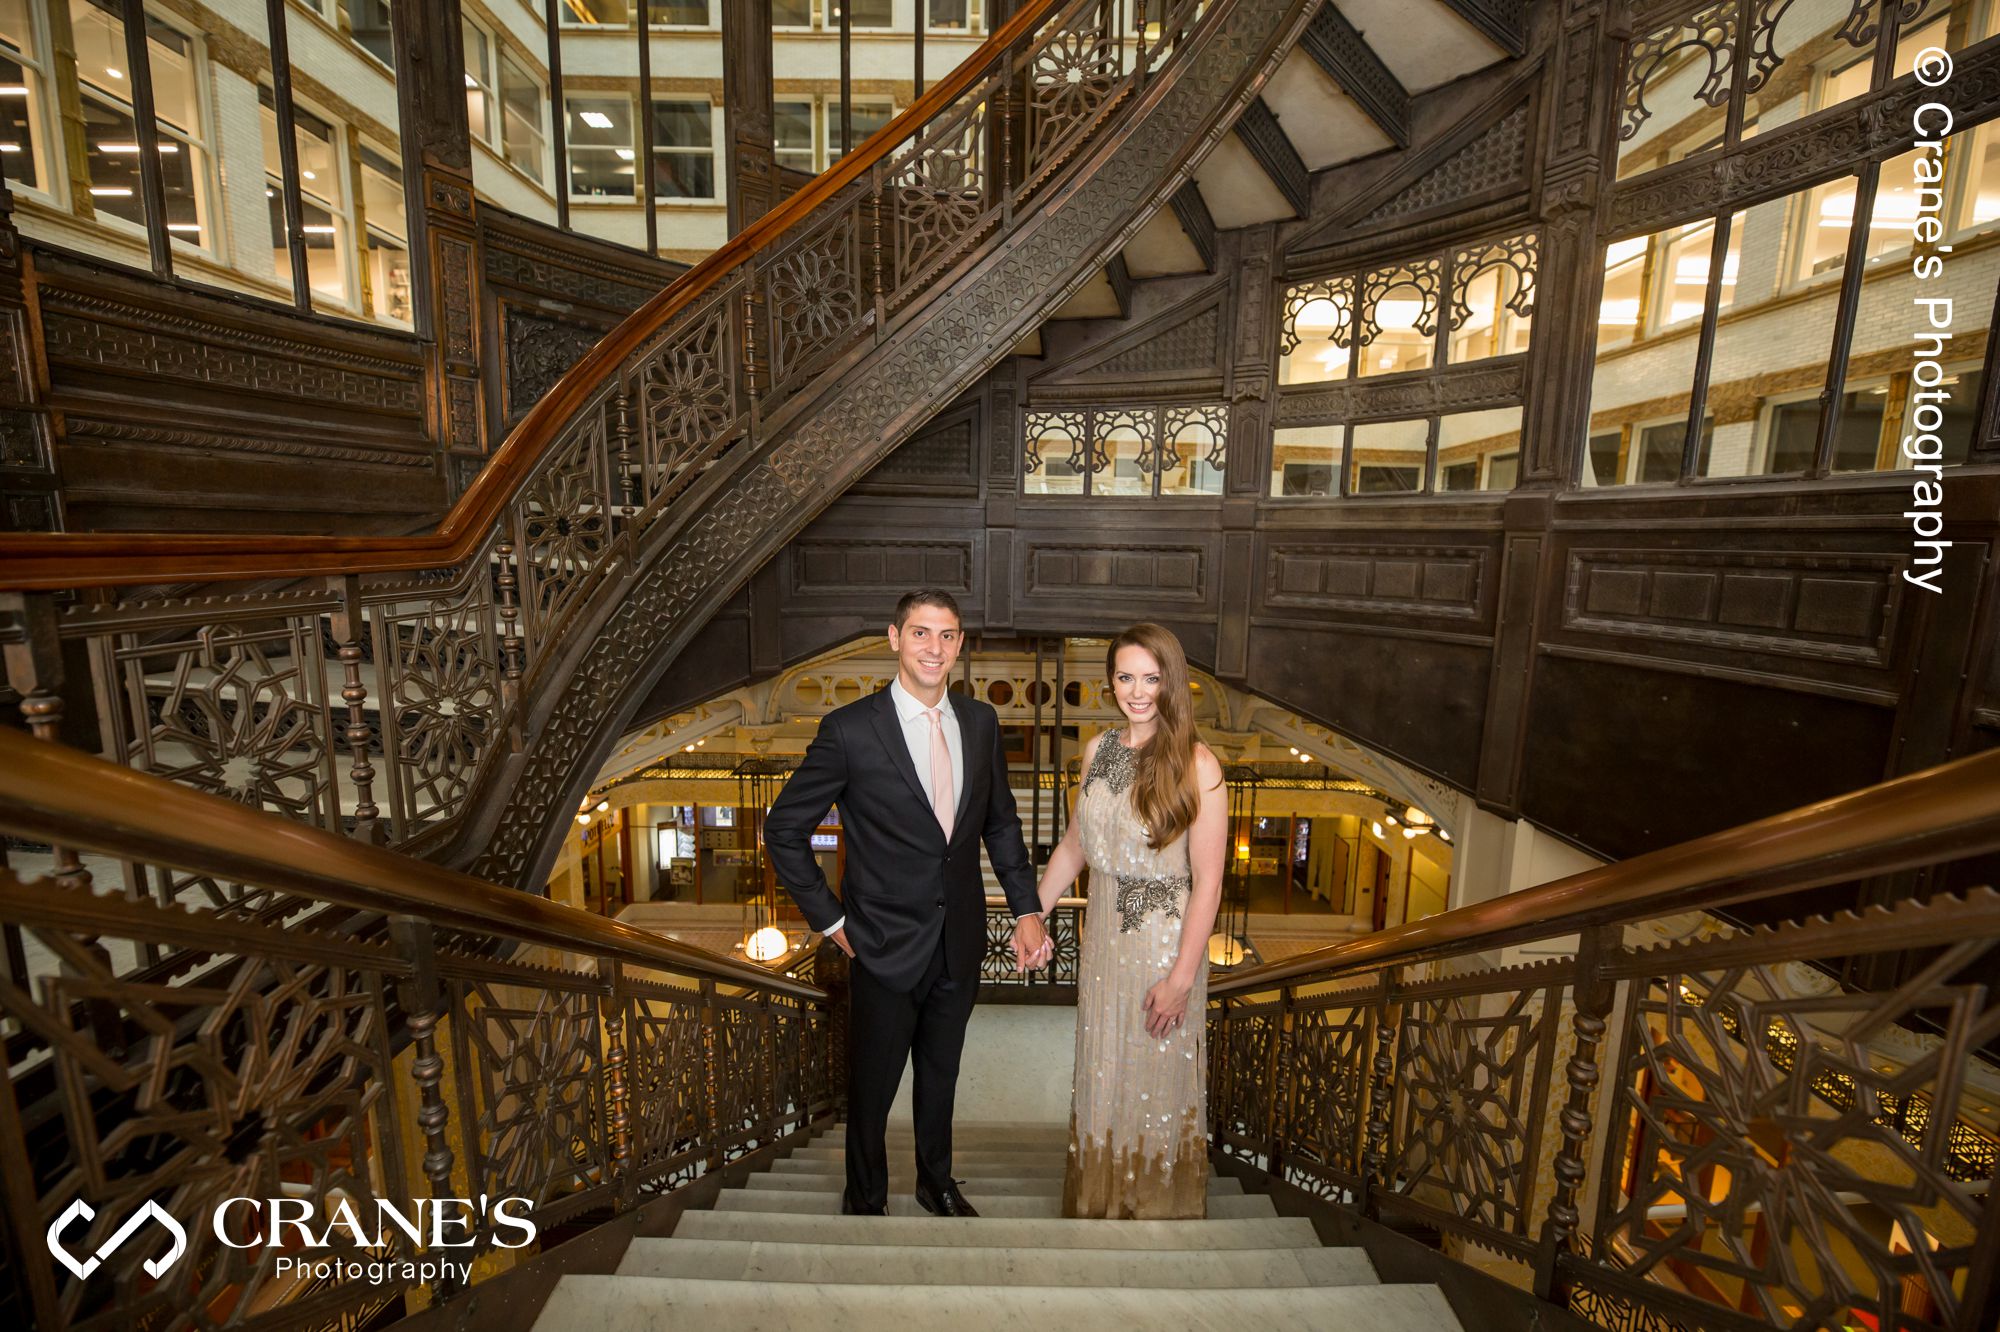 Timeless image of a couple standing at the stairs at The Rookery Building in Chicago